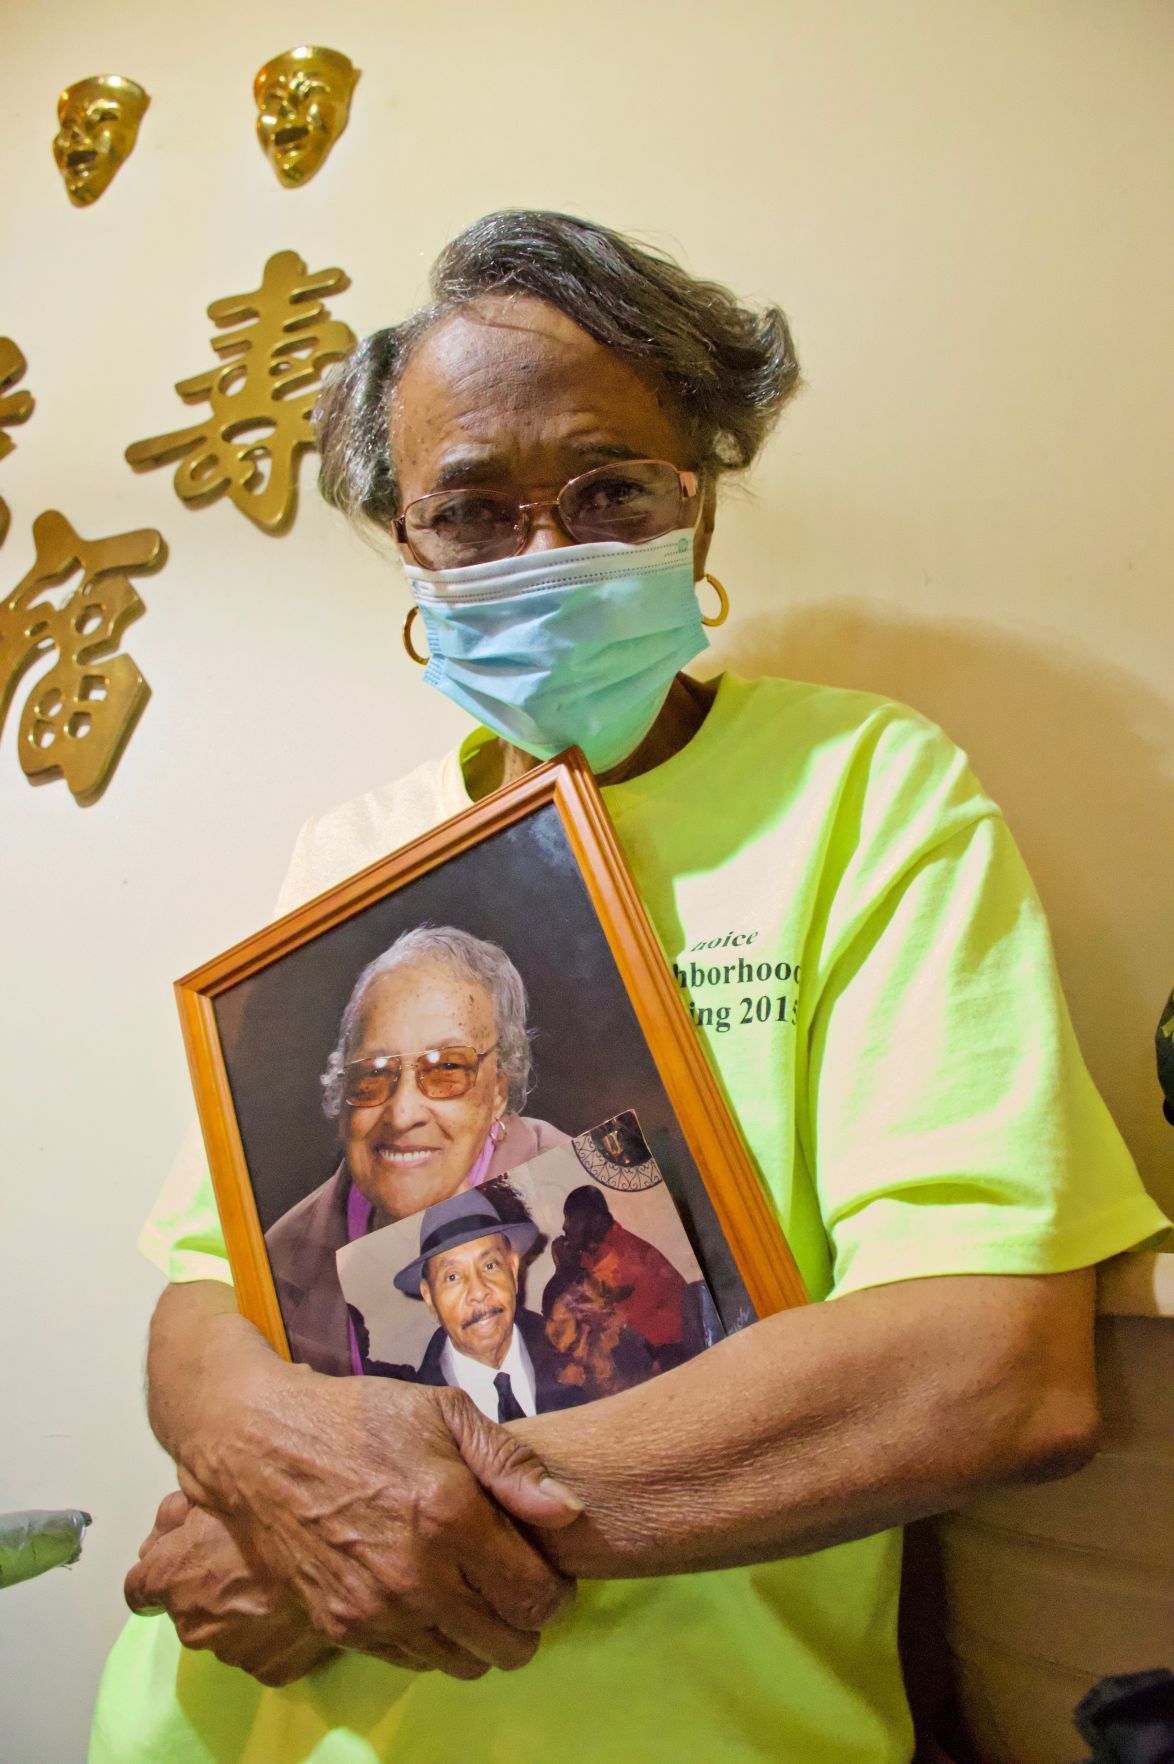 Valerie Nichols poses with photos of her mother, Willie Mae Nichols, and father, Anthony Nichols at her home in Preservation Square. Her father is deceased and her mother is living at Grand Manor Nursing and Rehabilitation Center. Image by Wiley Price/St. Louis American. United States, 2020.